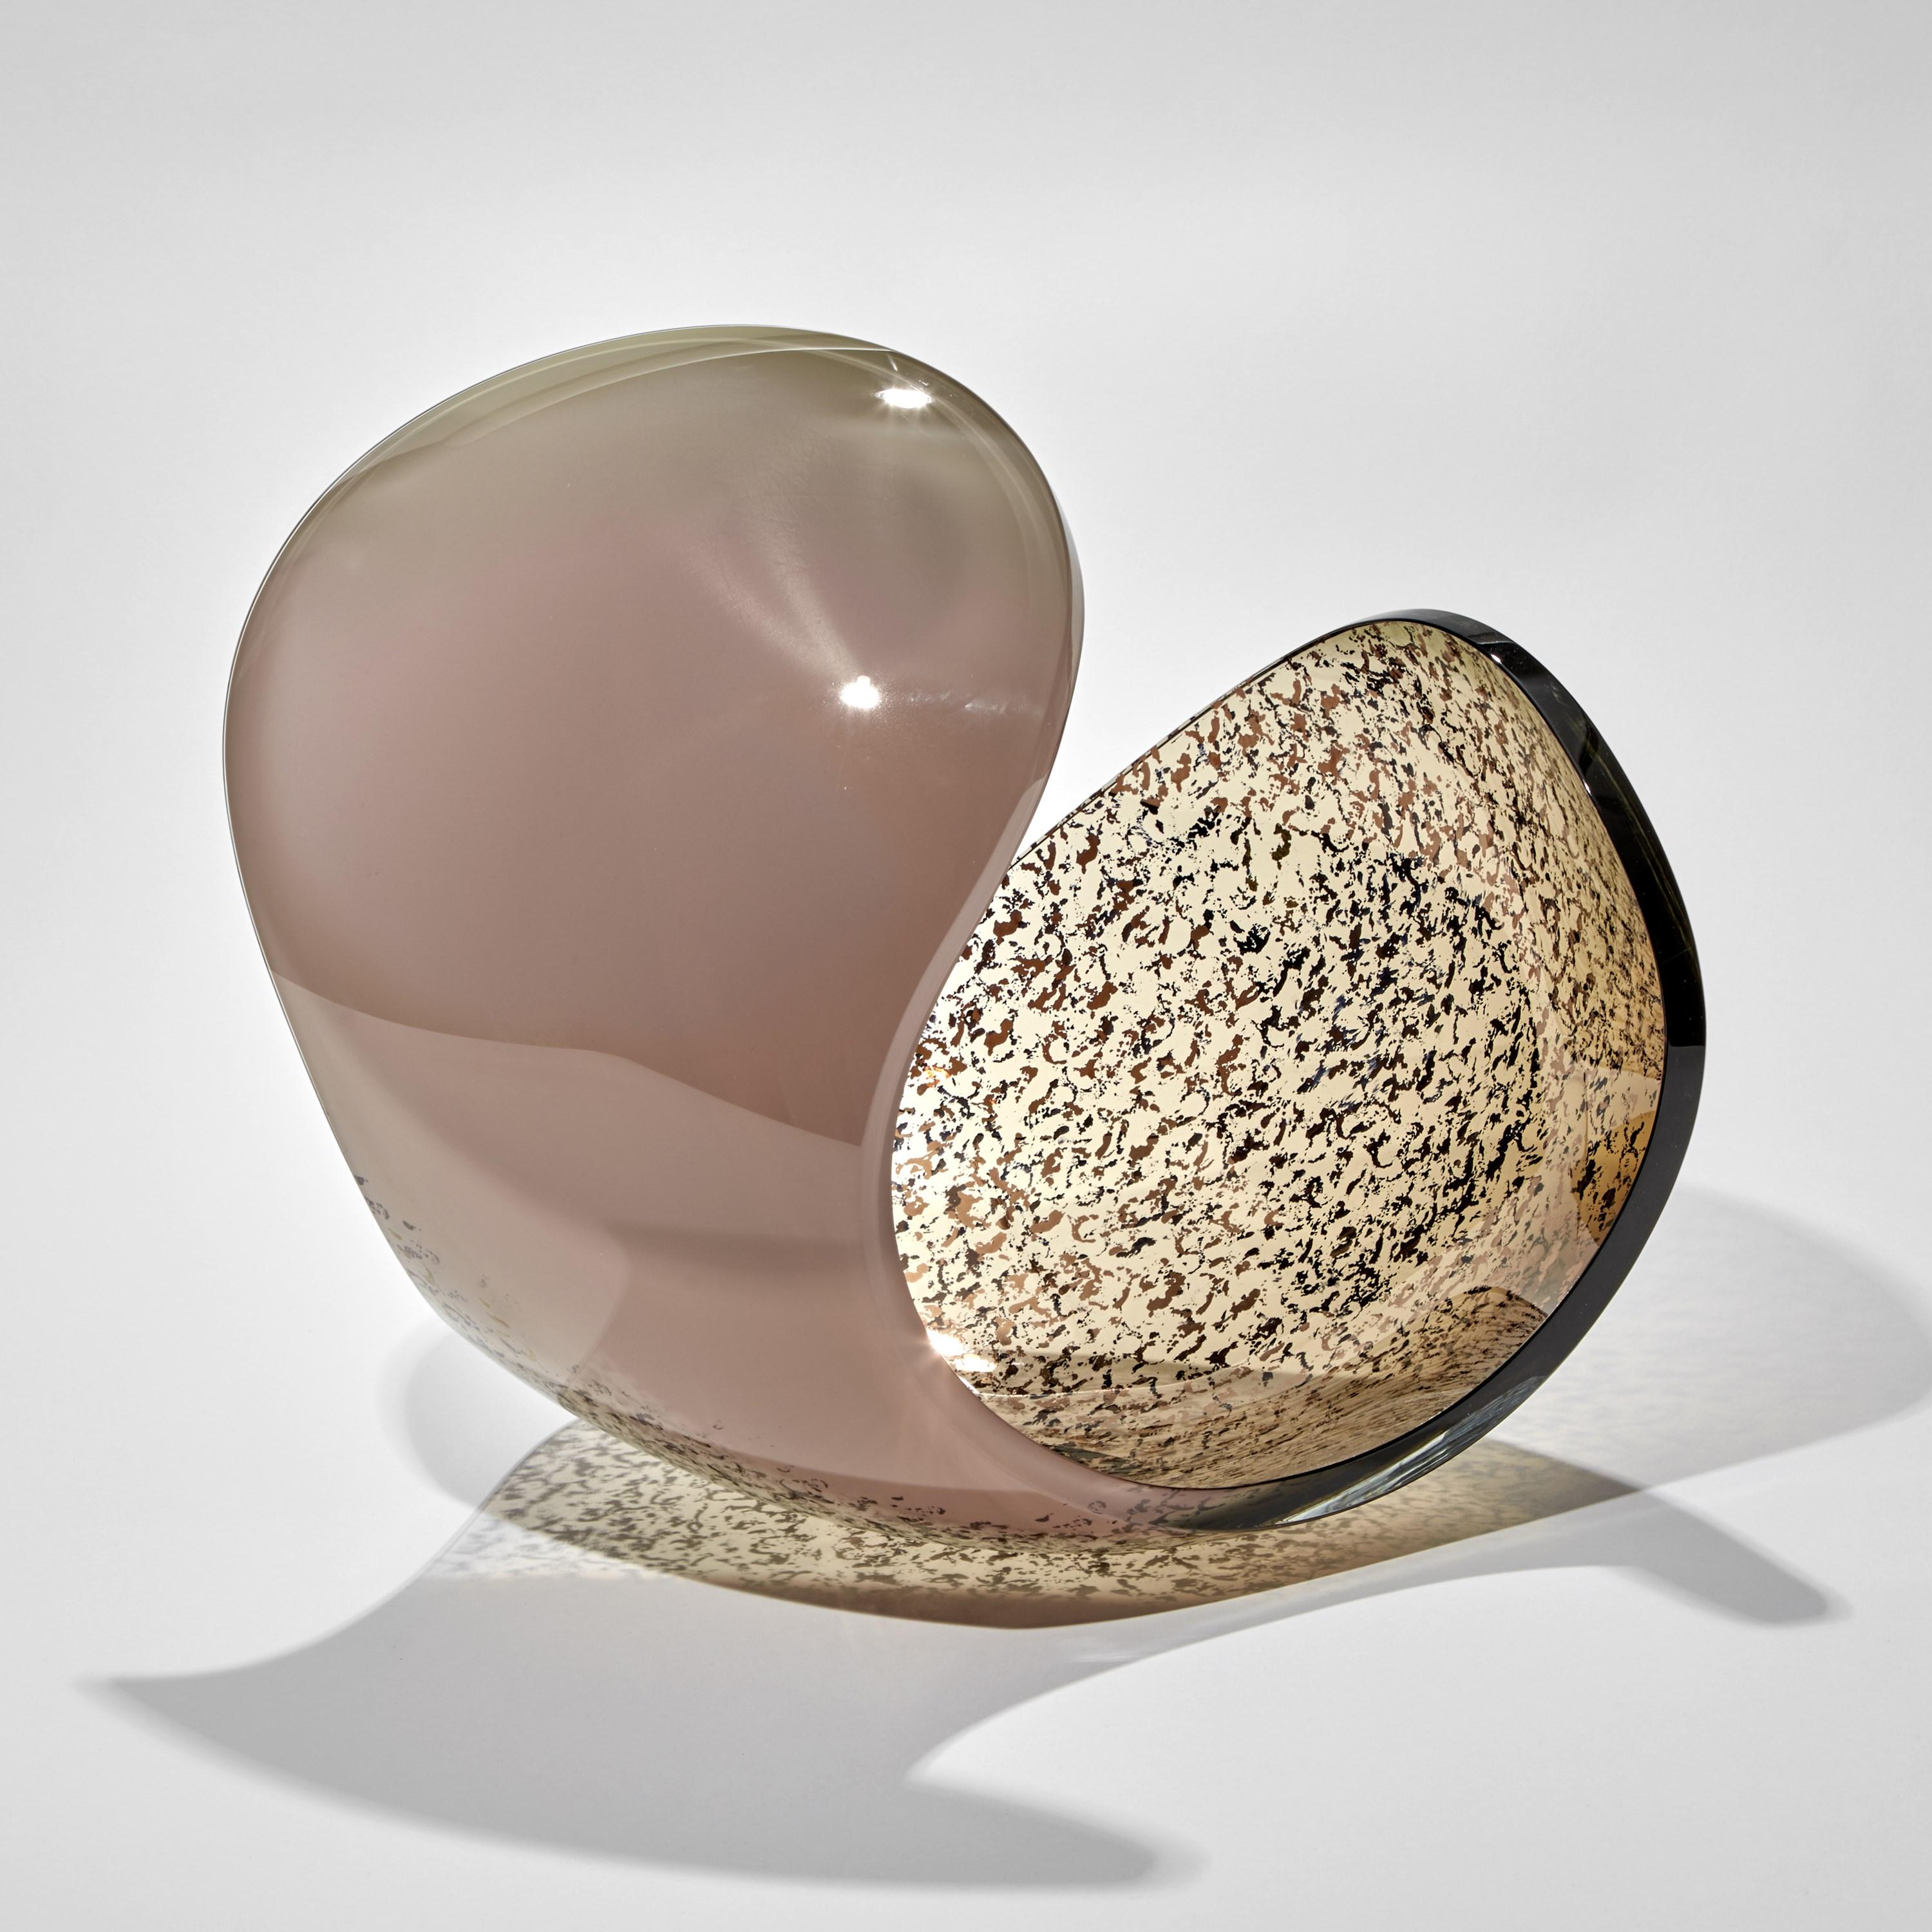 'Planet in Pink, Brown & Gold' is a unique glass sculptural artwork and centerpiece by the Swedish artist Lena Bergström. This piece is from an ongoing collection of works called the Planets which the artist has revisited several times throughout